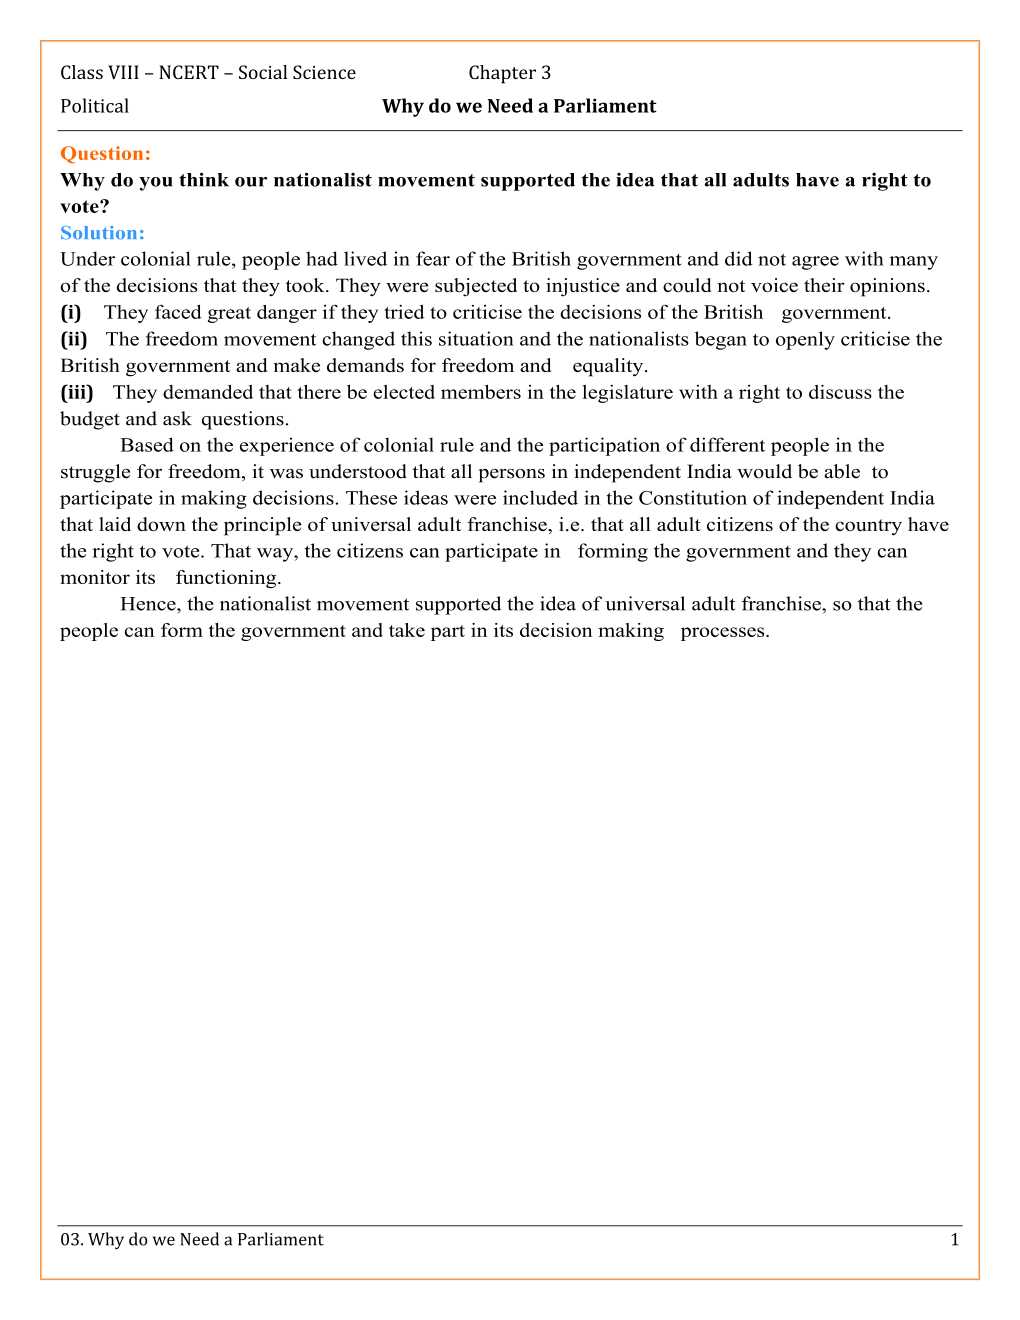 NCERT Solutions For Class 8 Social Science Social and Political Life Chapter 3 